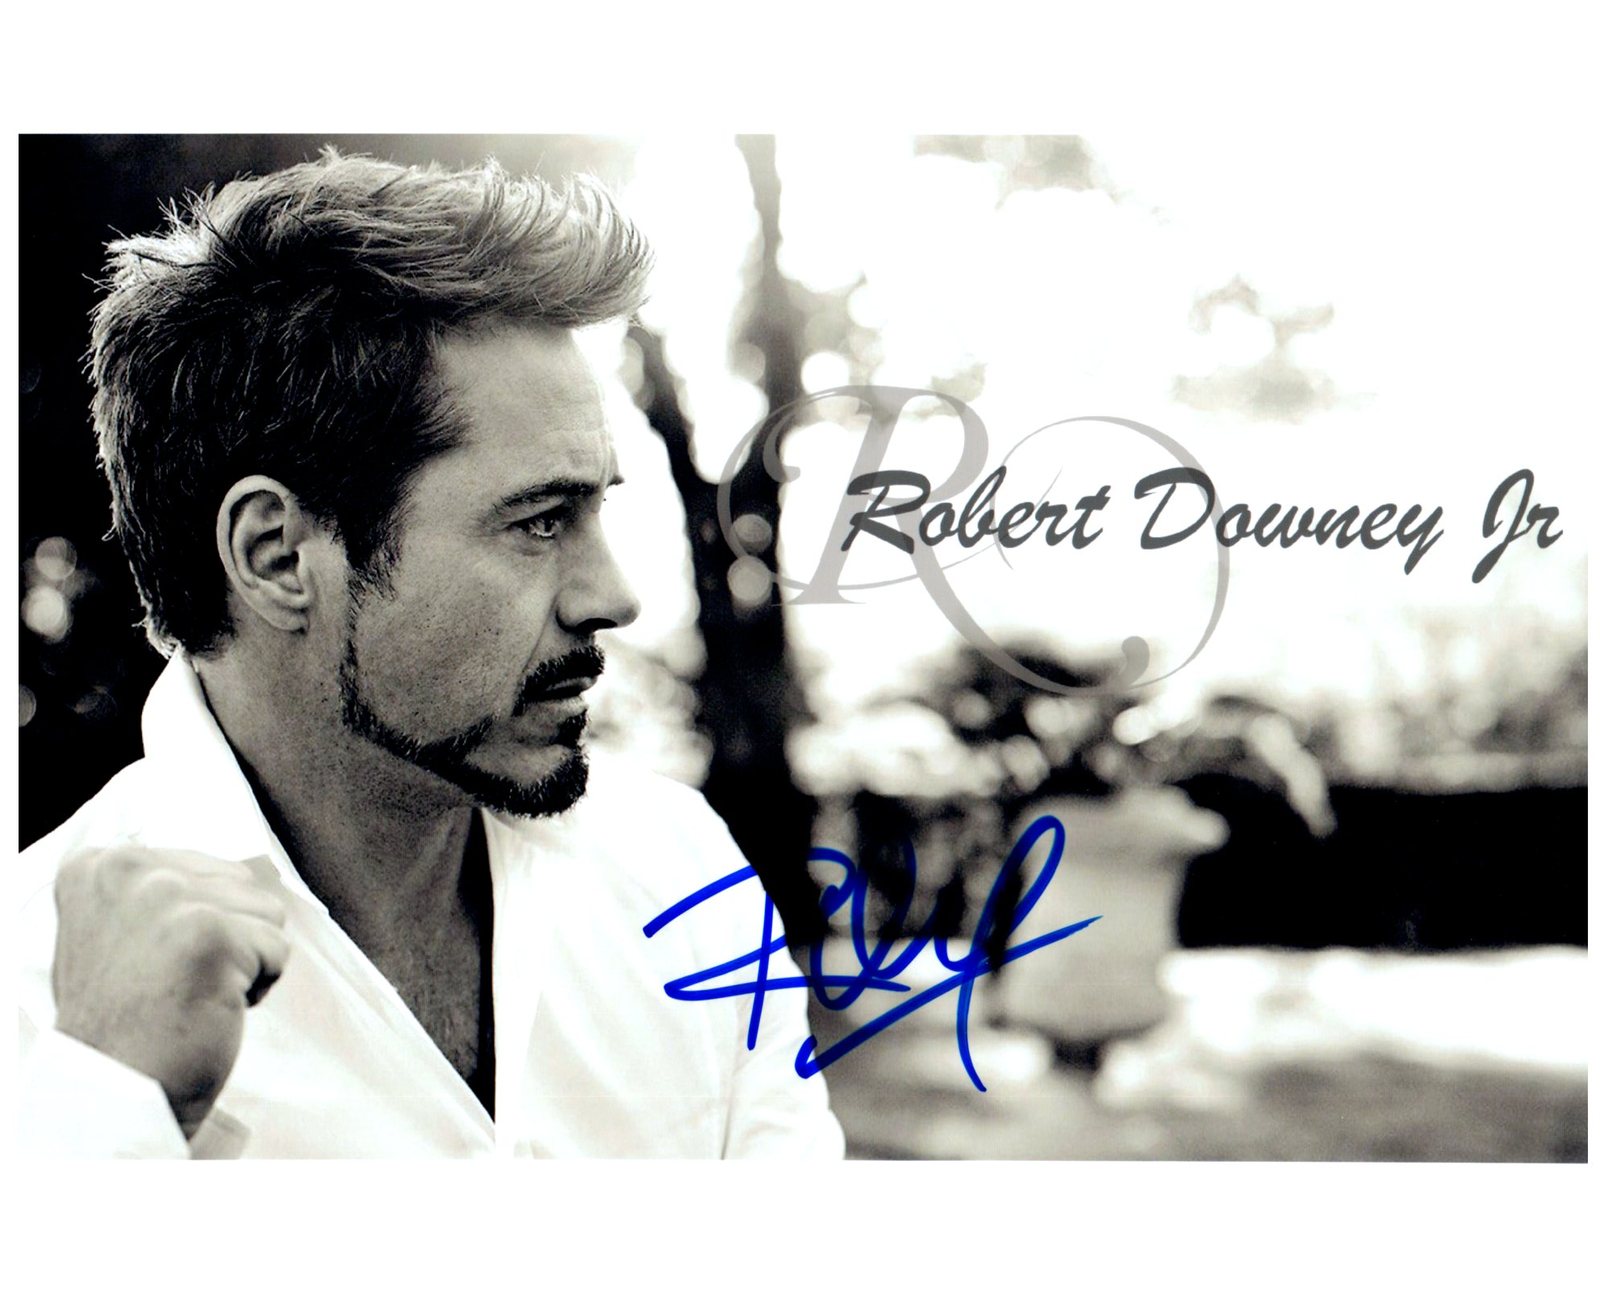 ROBERT DOWNEY JR SIGNED AUTOGRAPHED 8X10 PHOTO w/ Certificate of